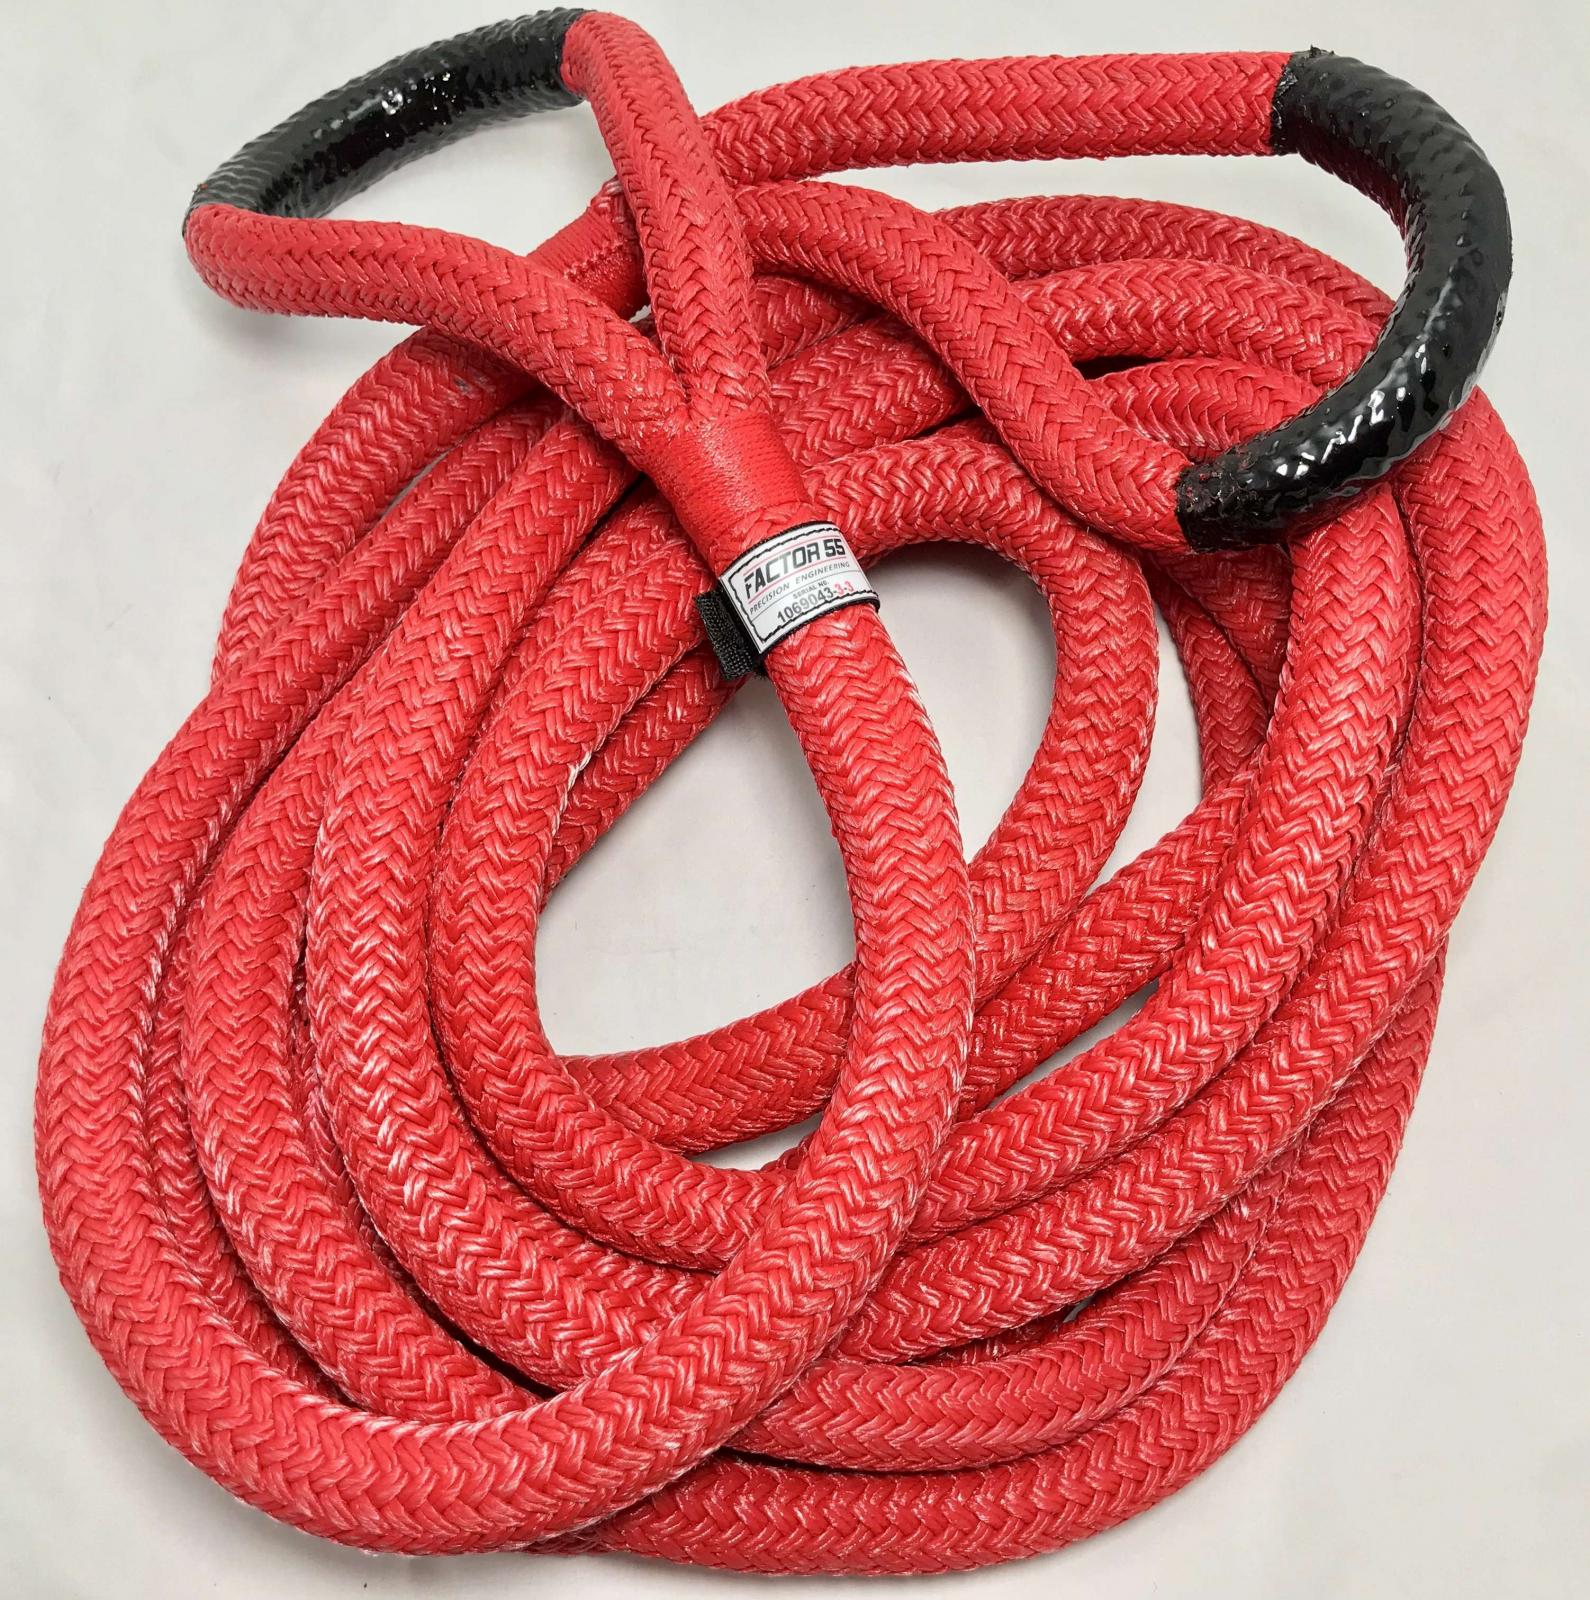 Factor 55 Extreme Duty Kinetic Energy Rope (7/8" x 30')